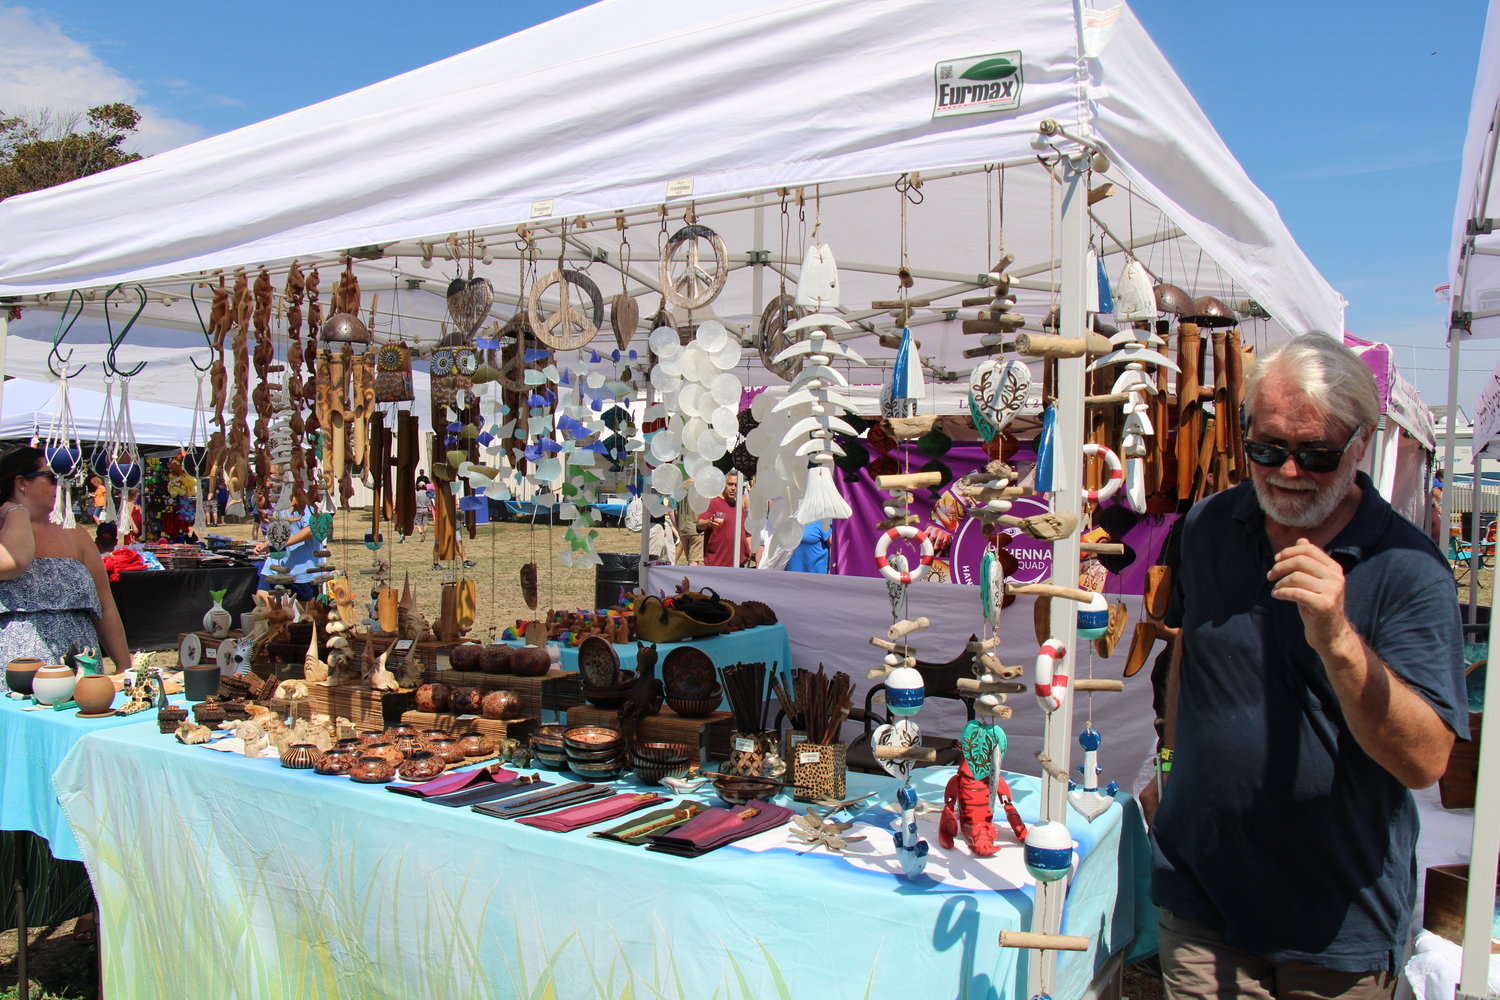 Vendors had everything from fine jewelry to upside-down umbrellas.